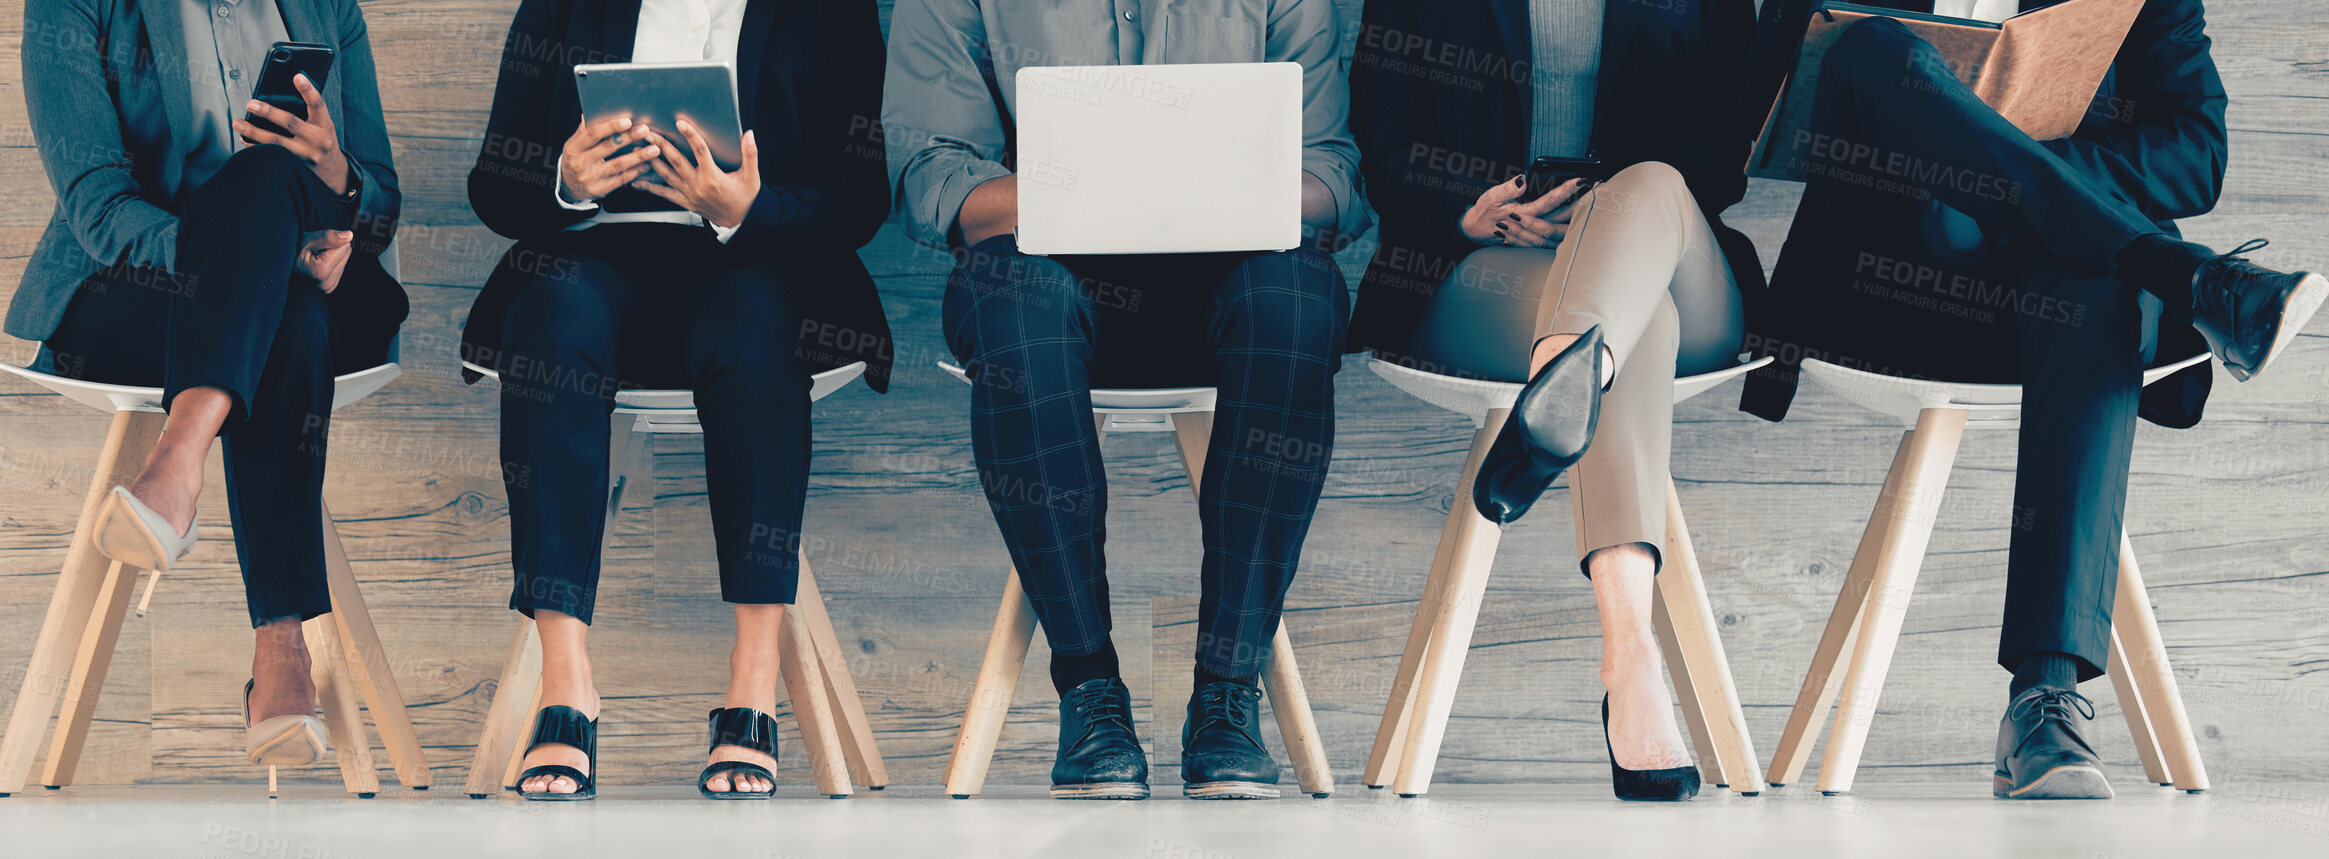 Buy stock photo Shot of a group of unrecognizable businesspeople using different forms of technology while waiting in line at an office